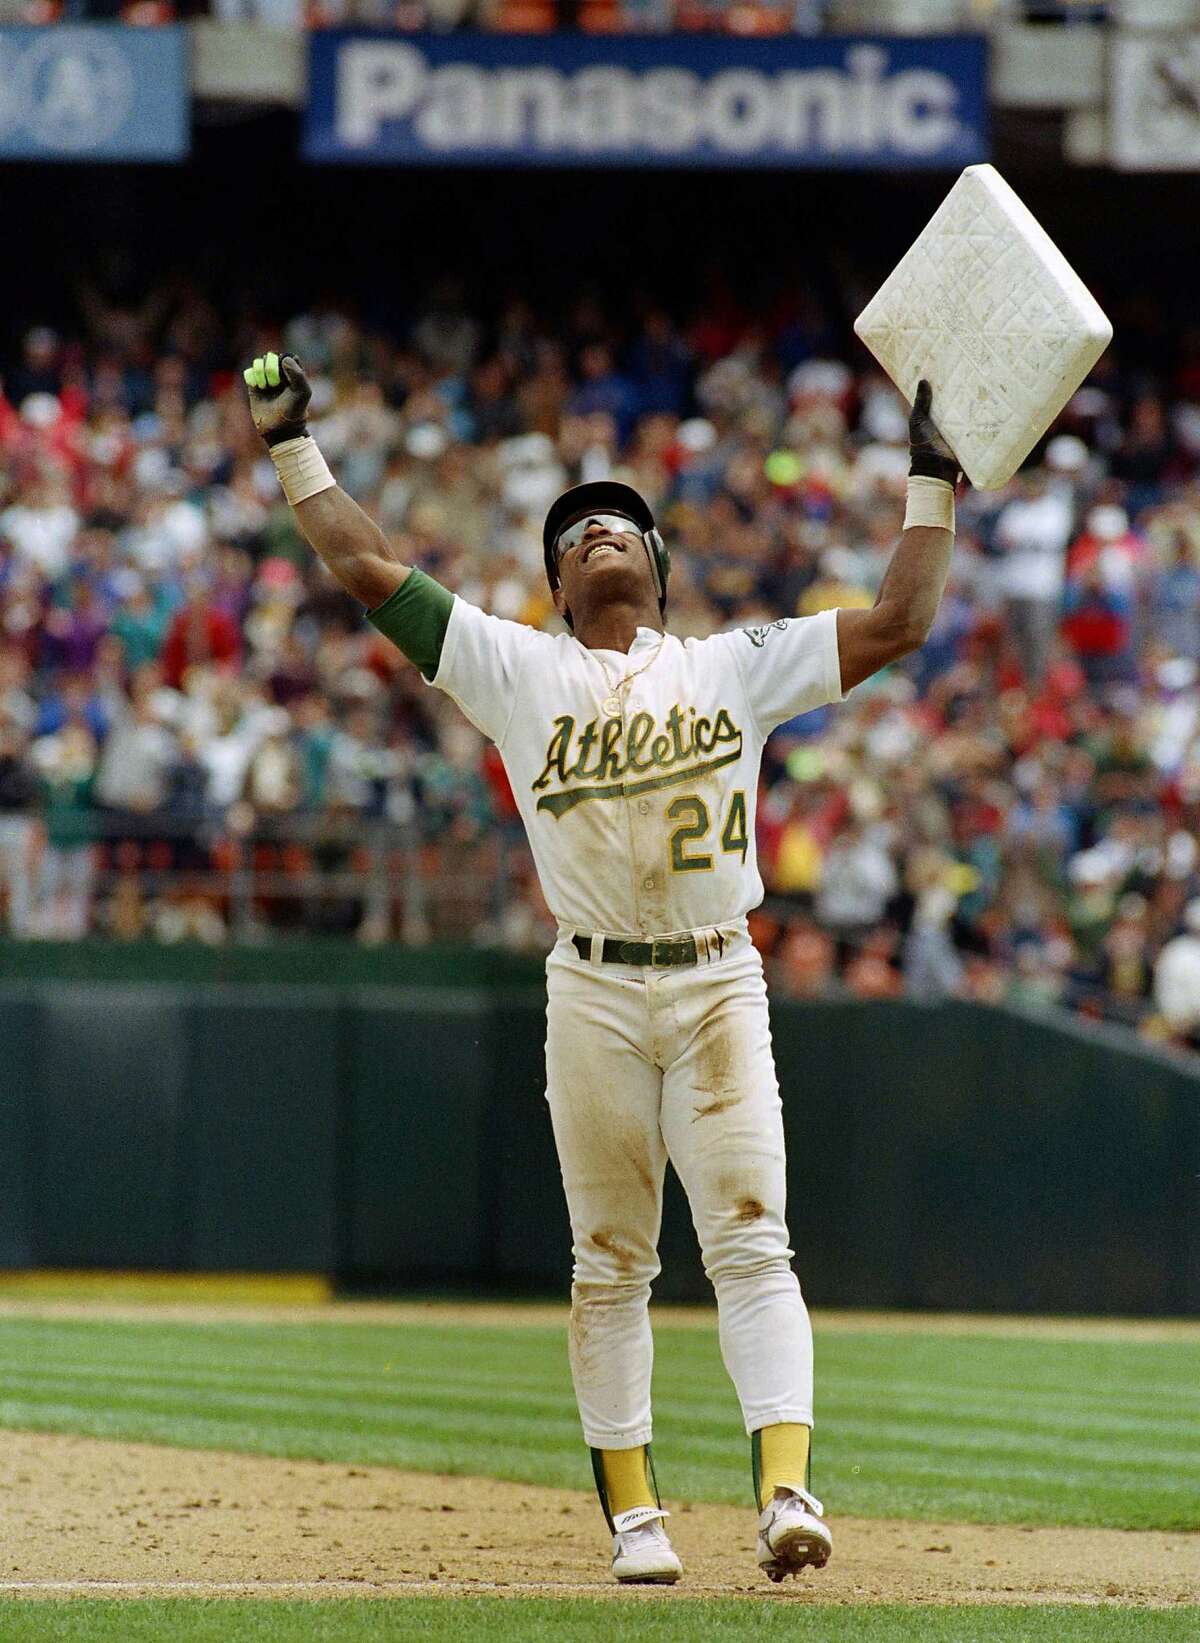 ** FILE ** In this May 1, 1991, file photo, Oakland Athletics' Rickey Henderson celebrates and raises third base after setting the all-time stolen base record during the Athletics' baseball game in Oakland, Calif., against the New York Yankees. The stolen base was Henderson's 939th, moving him past Lou Brock. Henderson was voted into baseball's Hall of Fame on Monday, Jan. 12, 2009. (AP Photo/Eric Risberg, File)